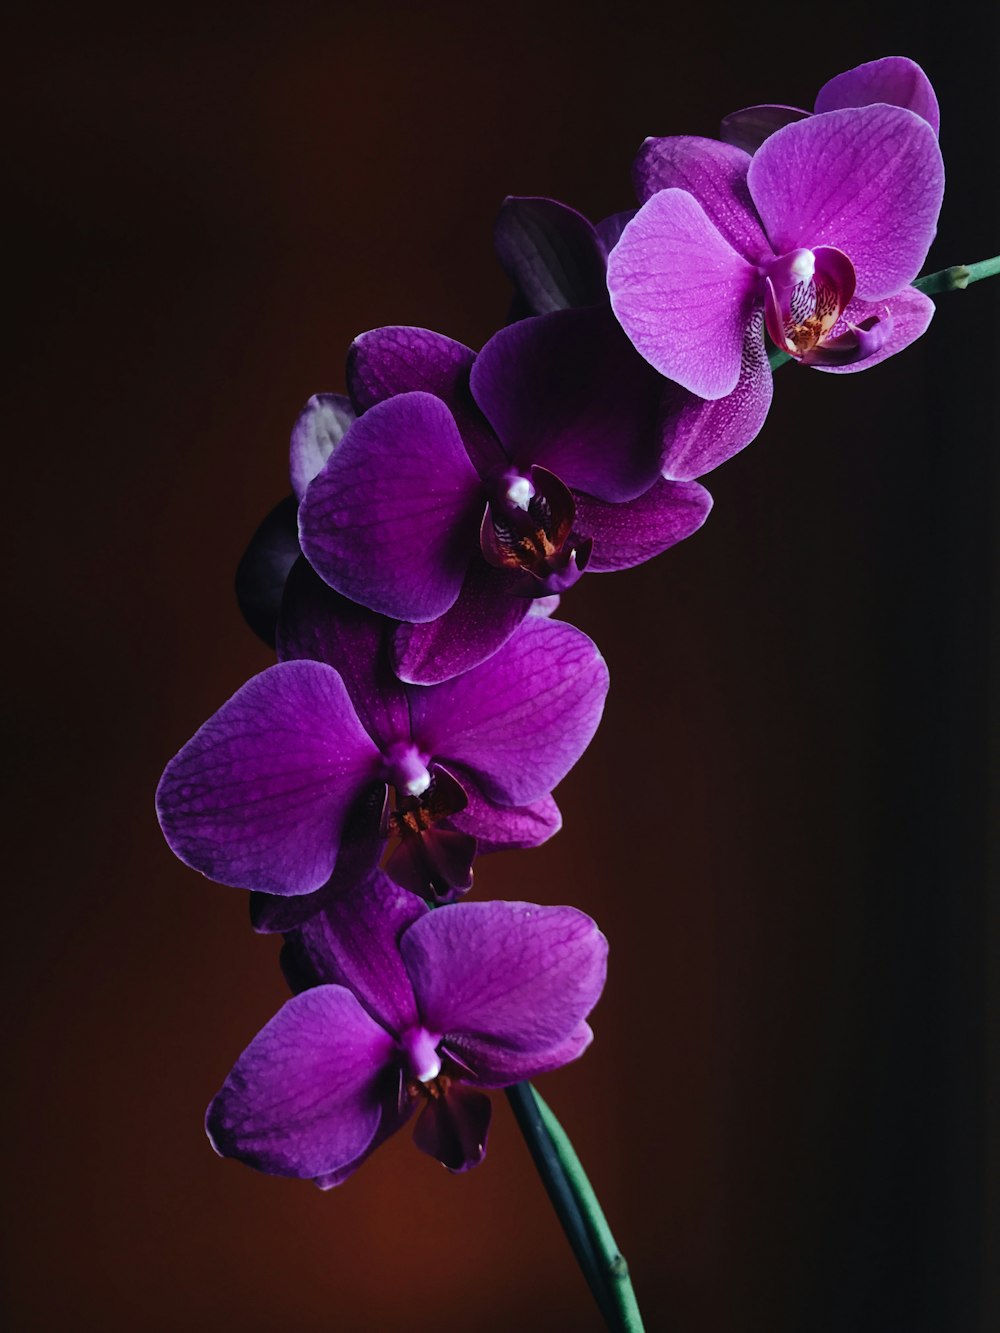 close-up photo of purple Orchid flower